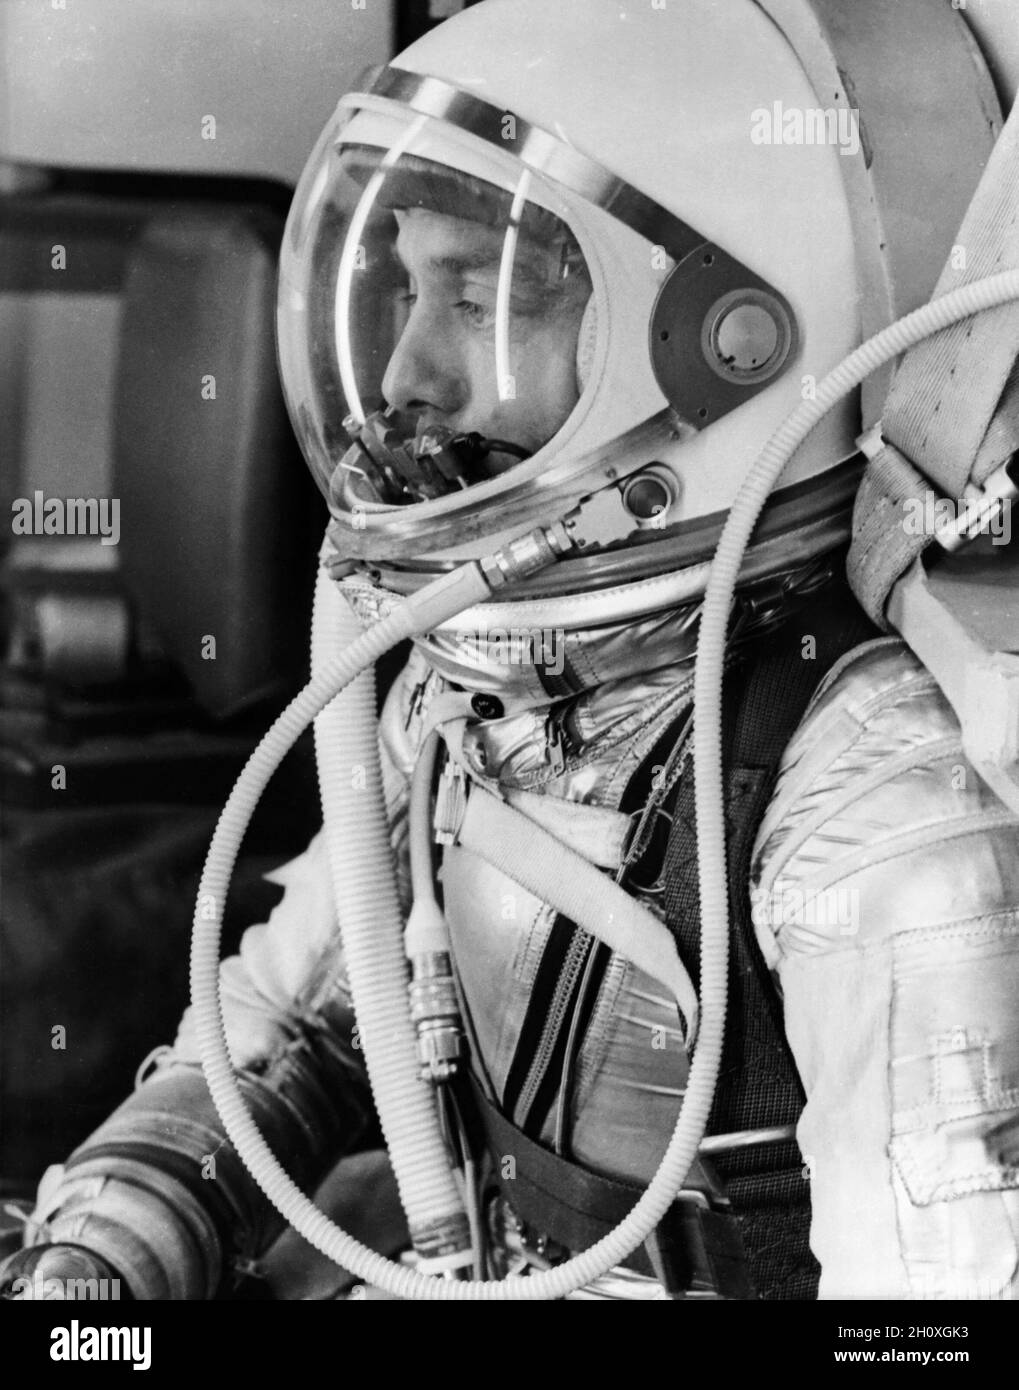 (5 May 1961) --- Side view of astronaut Alan B. Shepard Jr. in his pressure suit, with helmet closed, for the Mercury-Redstone 3 (MR-3) flight, the first American manned spaceflight. Stock Photo